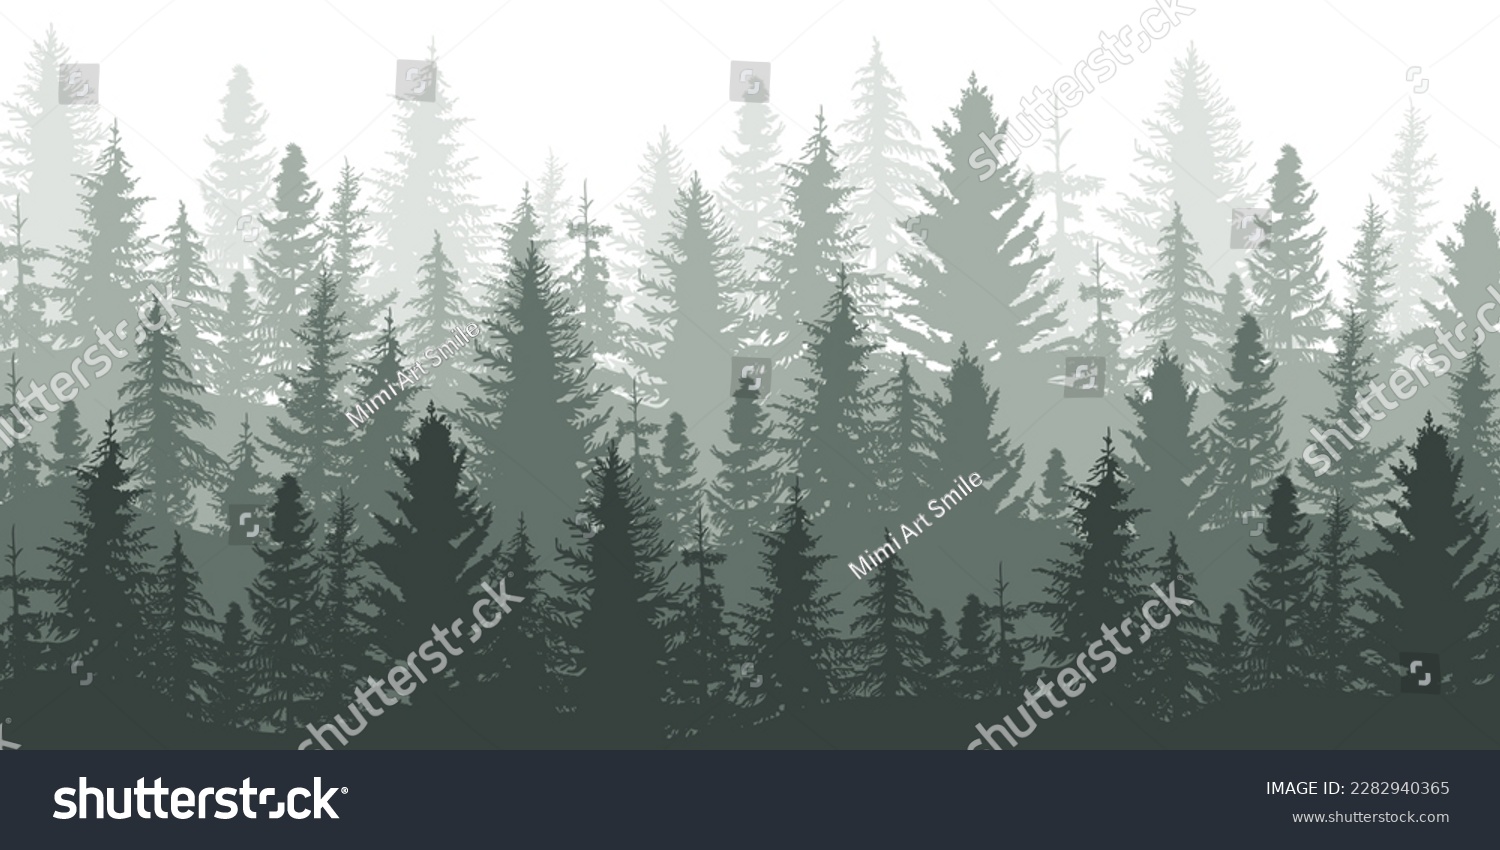 Forest panorama view. Pine tree landscape vector illustration.  Spruce silhouette. Banner background. #2282940365